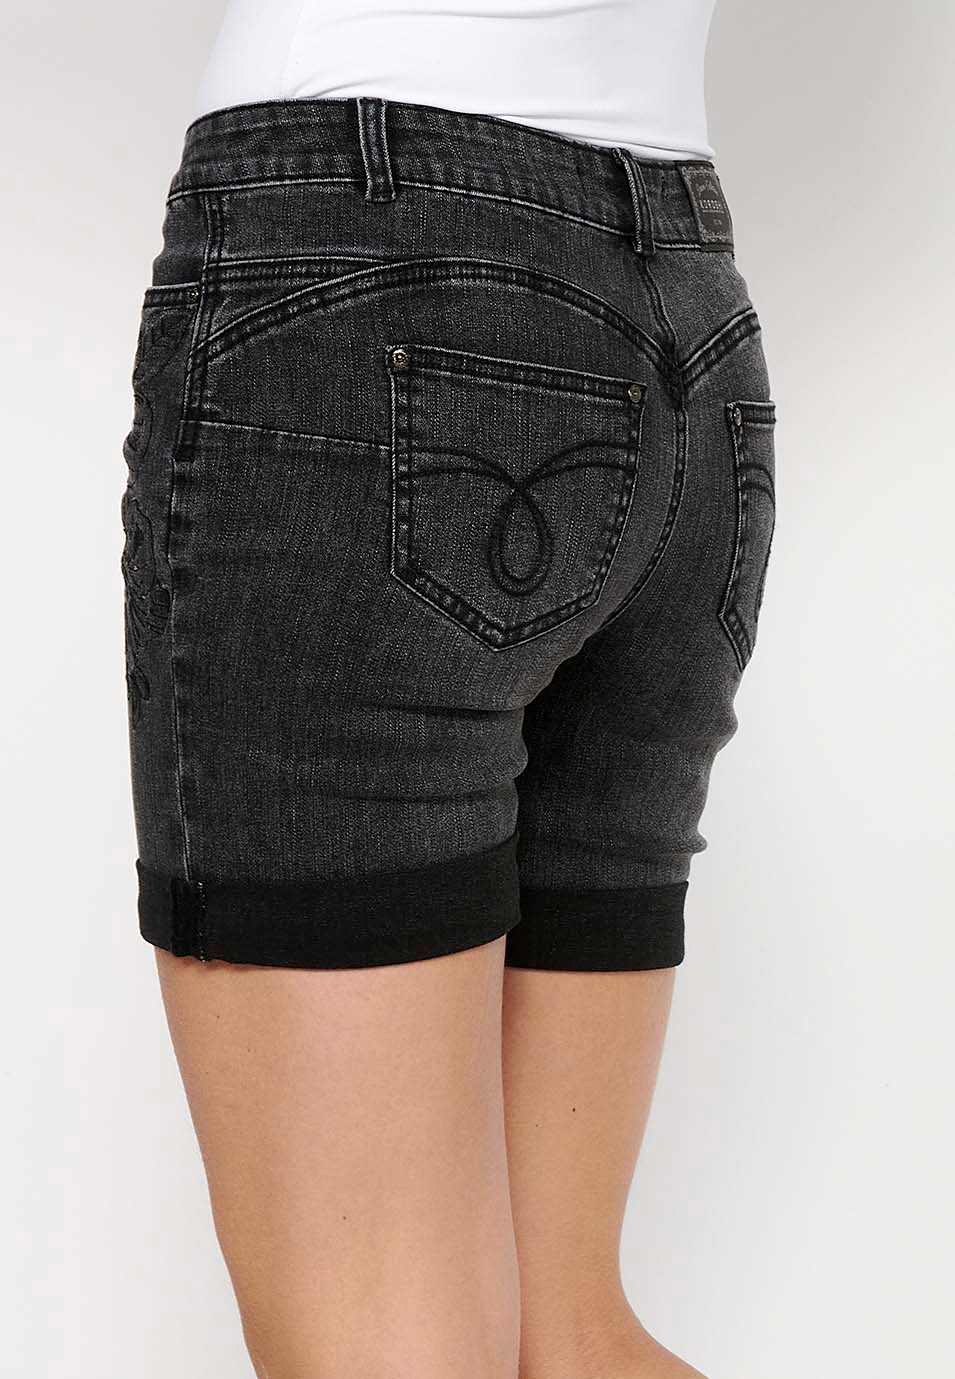 Shorts with a turn-up finish with front closure with zipper and button and floral embroidery in Black for Women 8